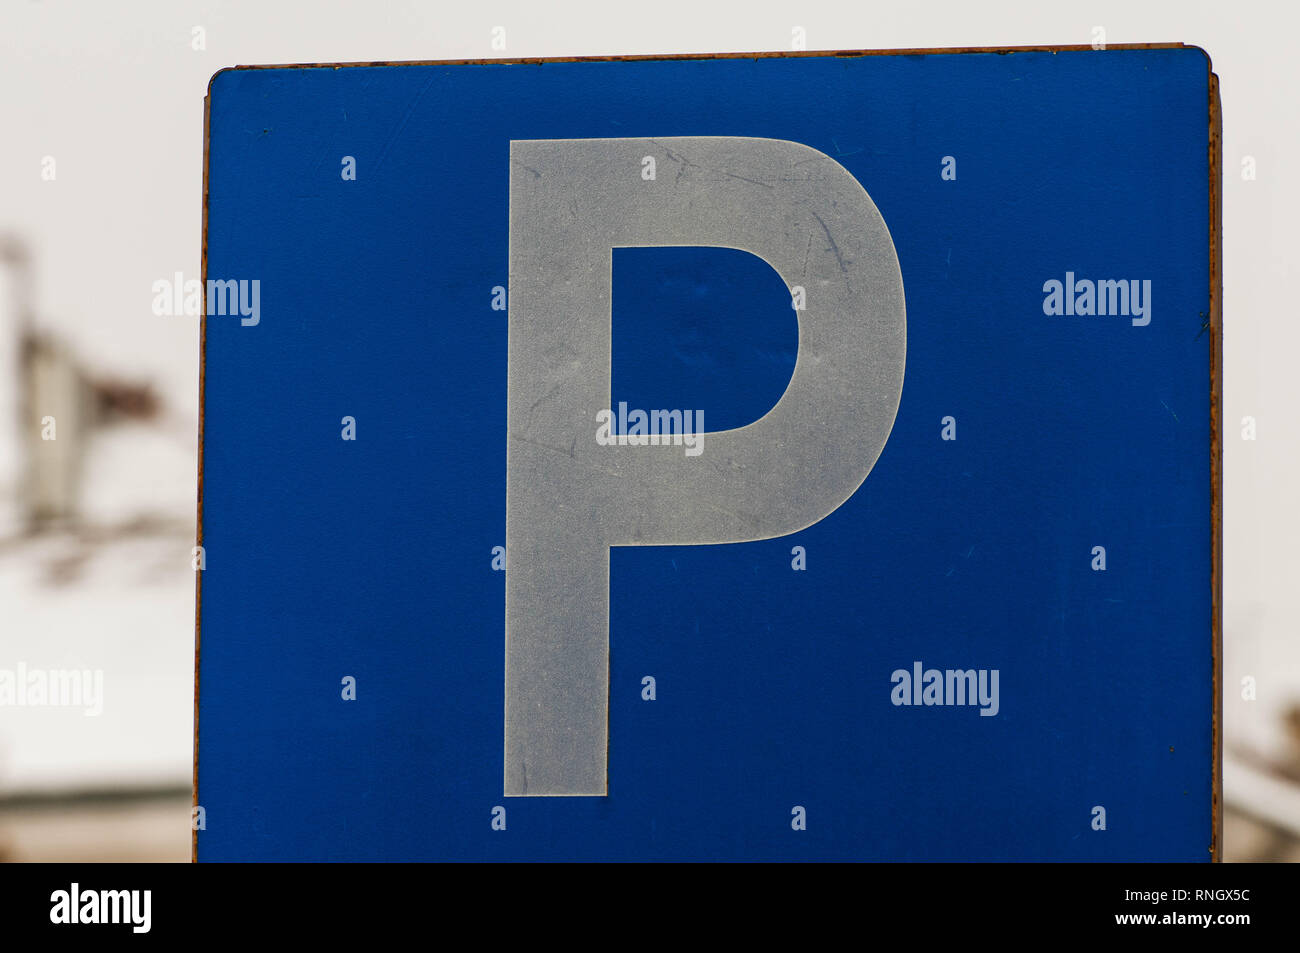 Blue parking sign Stock Photo